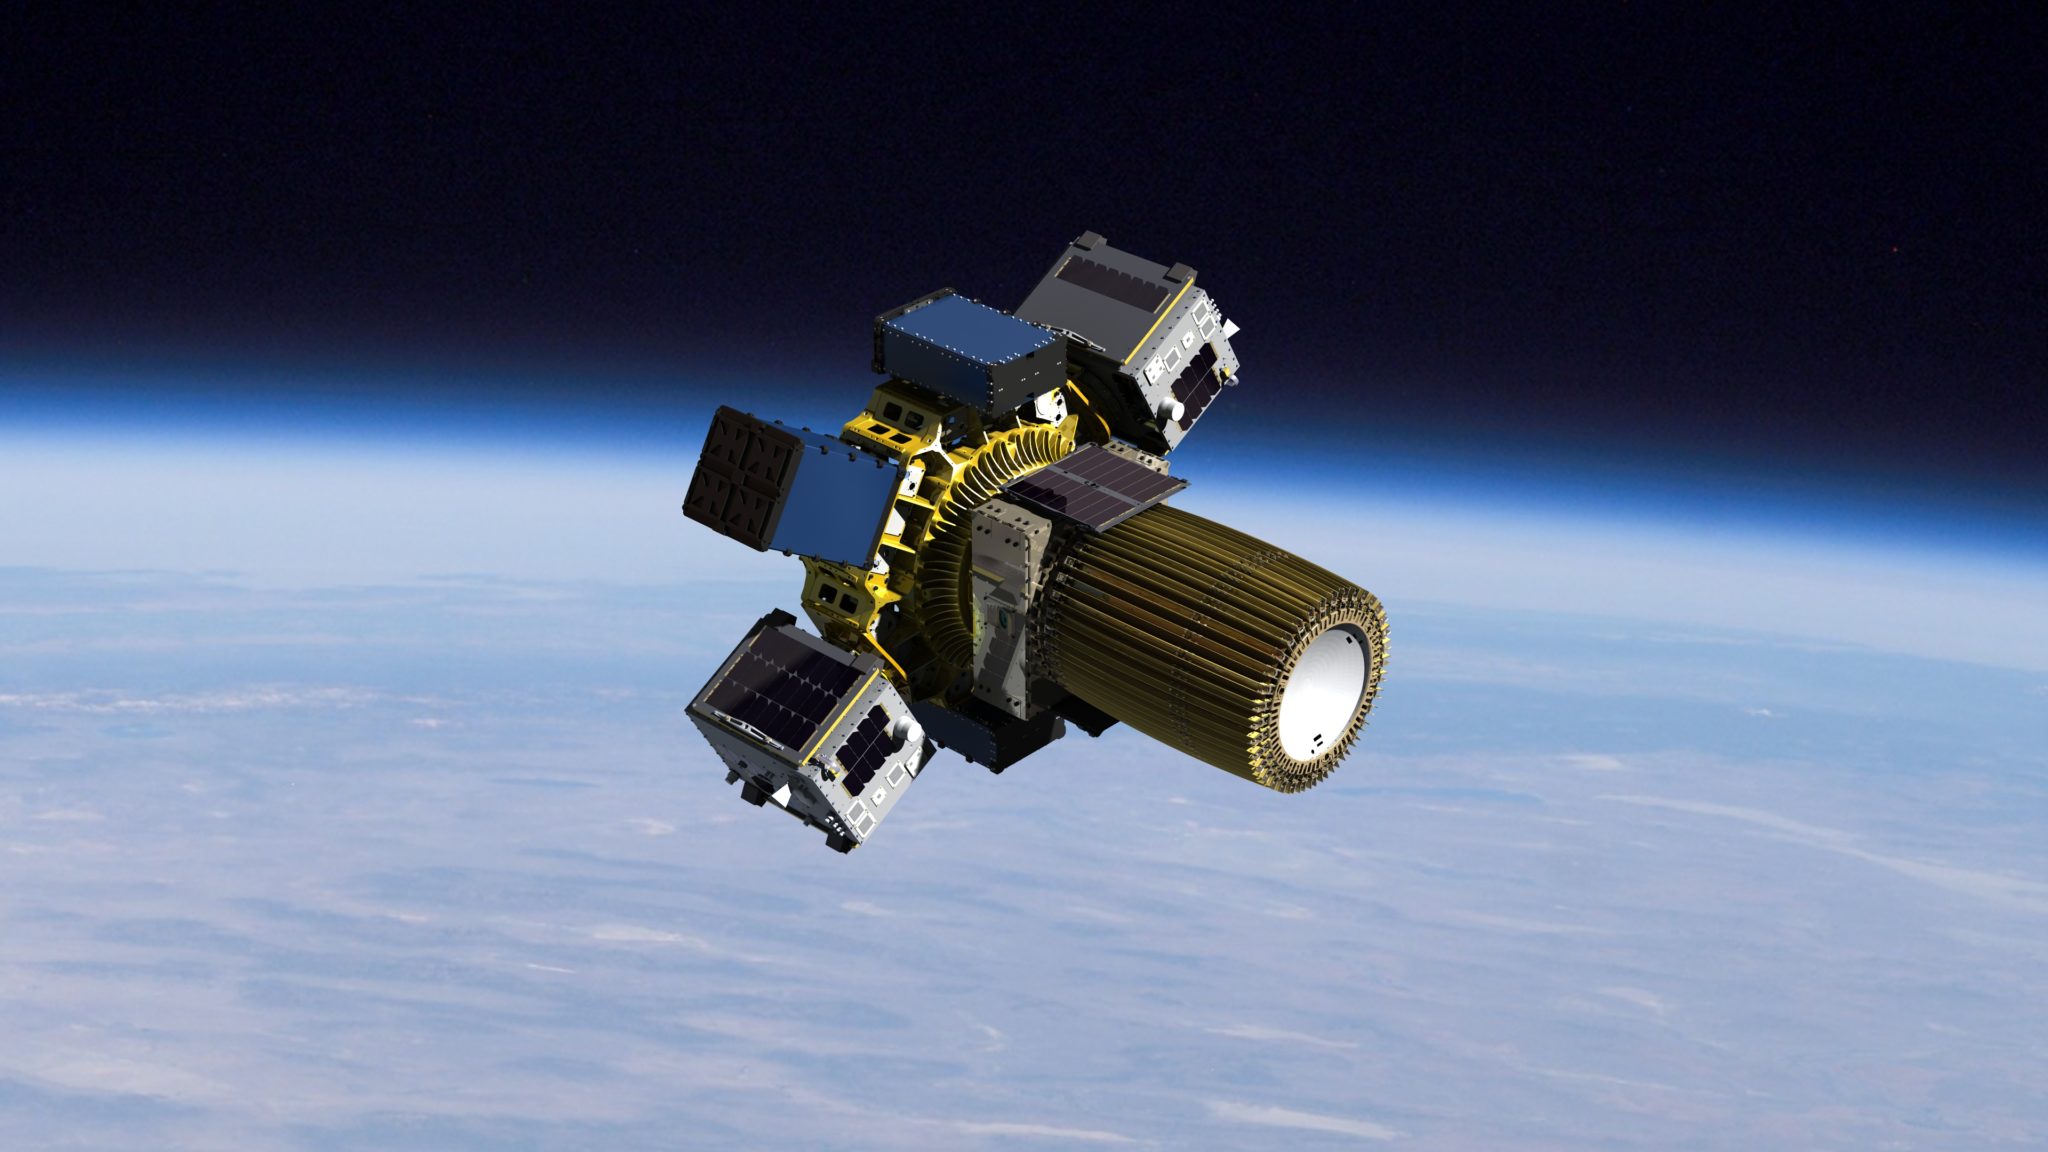 Spaceflight announces Sherpa tug with electric propulsion SpaceNews